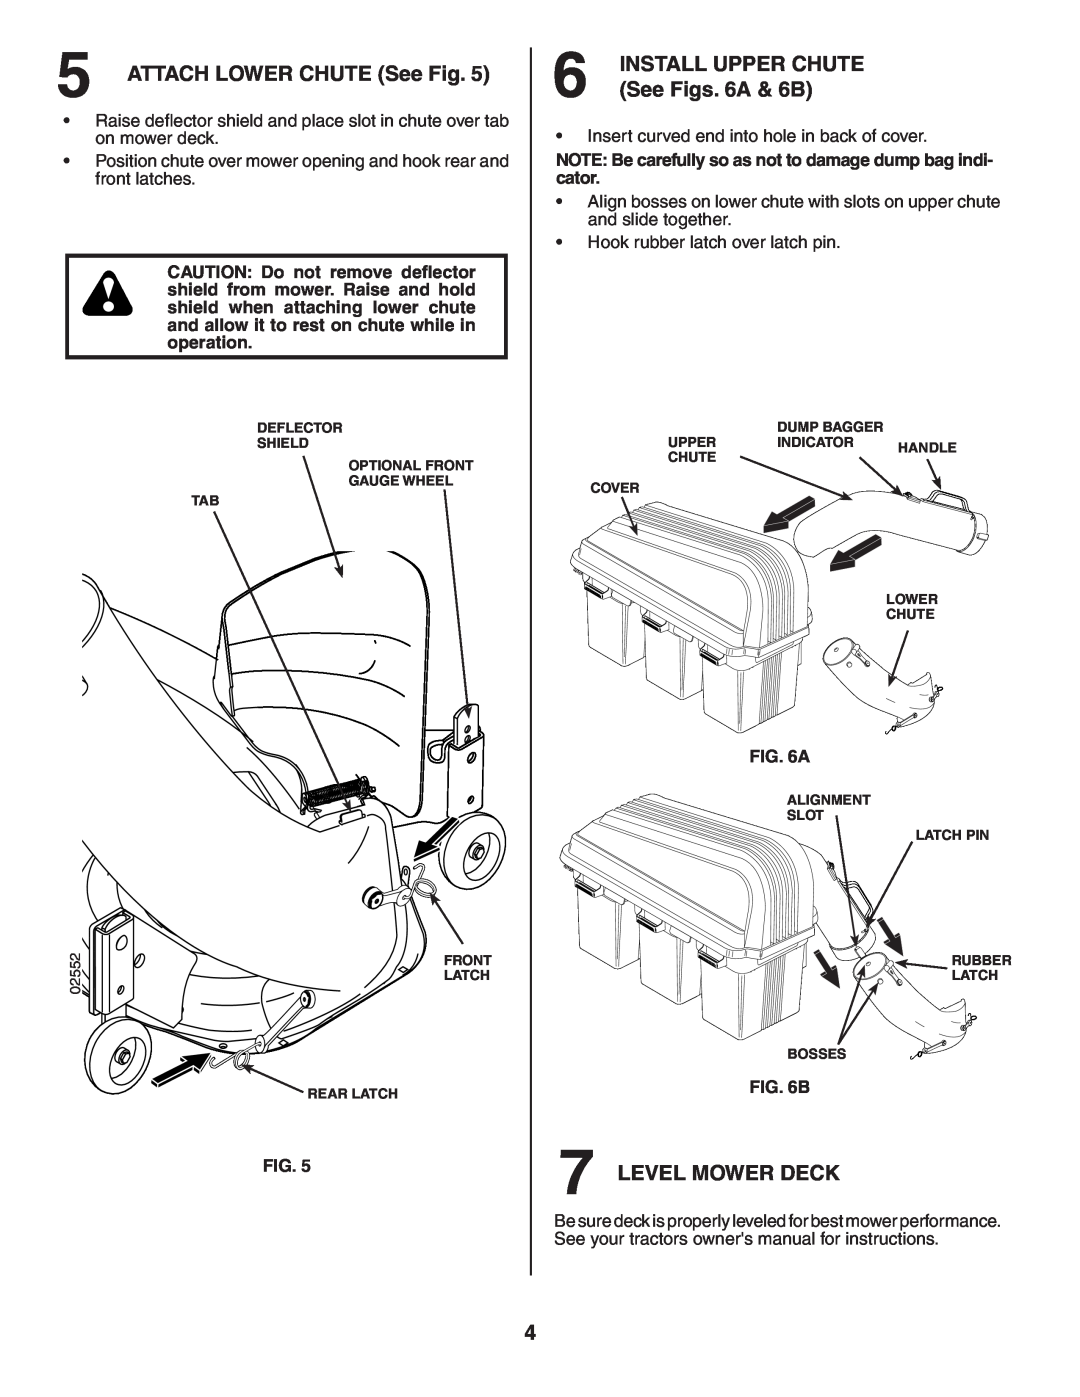 Poulan LTGTB48A owner manual ATTACH LOWER CHUTE See Fig, See Figs. 6A & 6B, Level Mower Deck, Install Upper Chute 